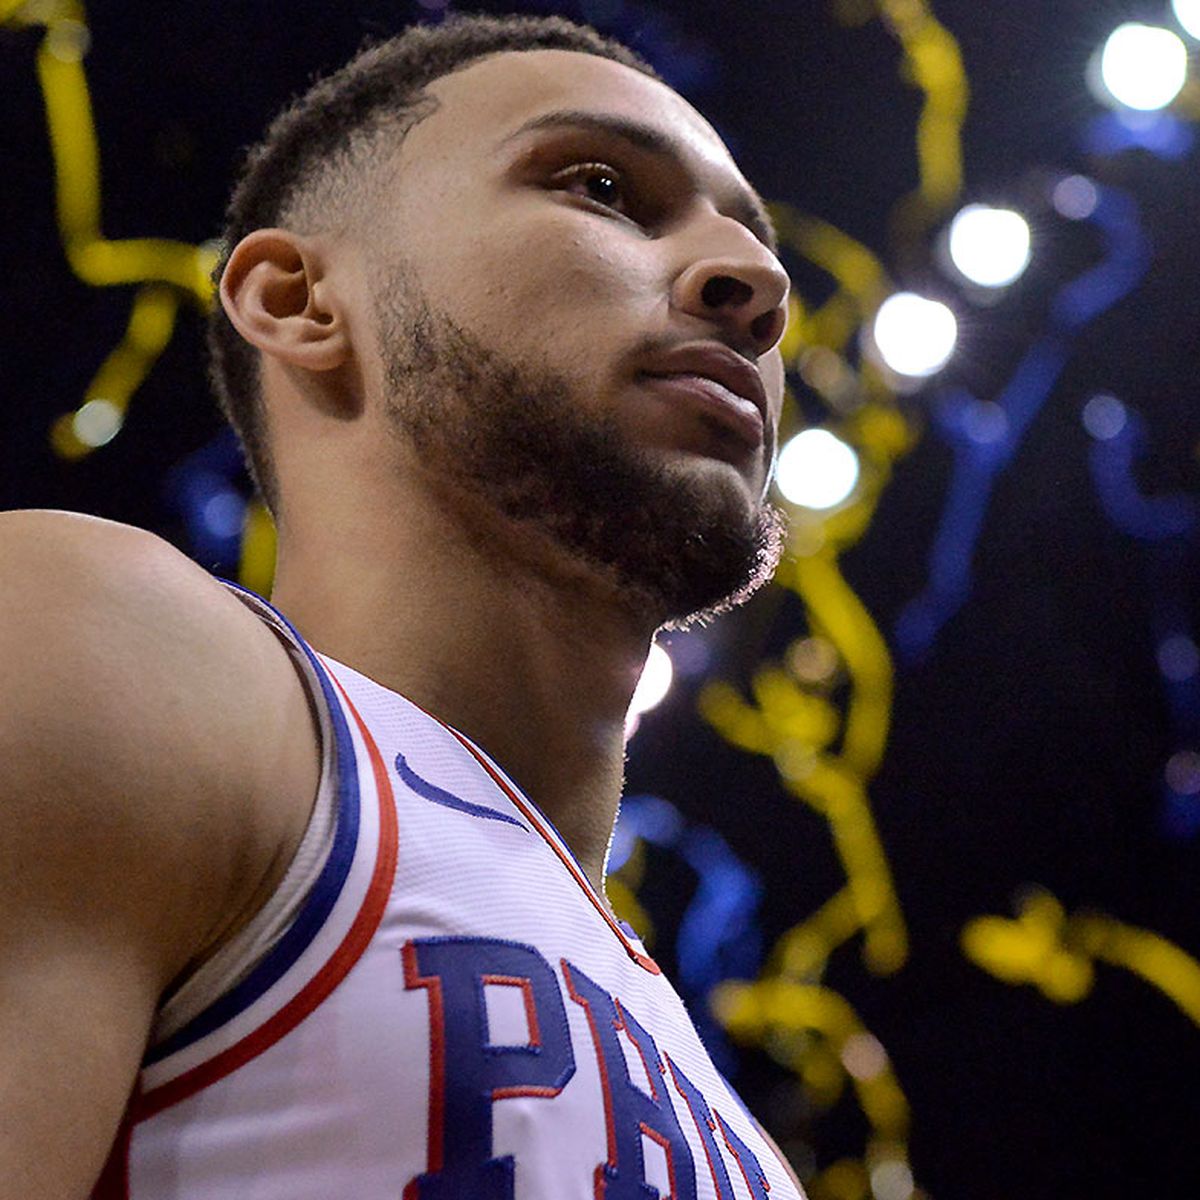 Yes, Ben Simmons is now the NBA's most underrated player: Aussie